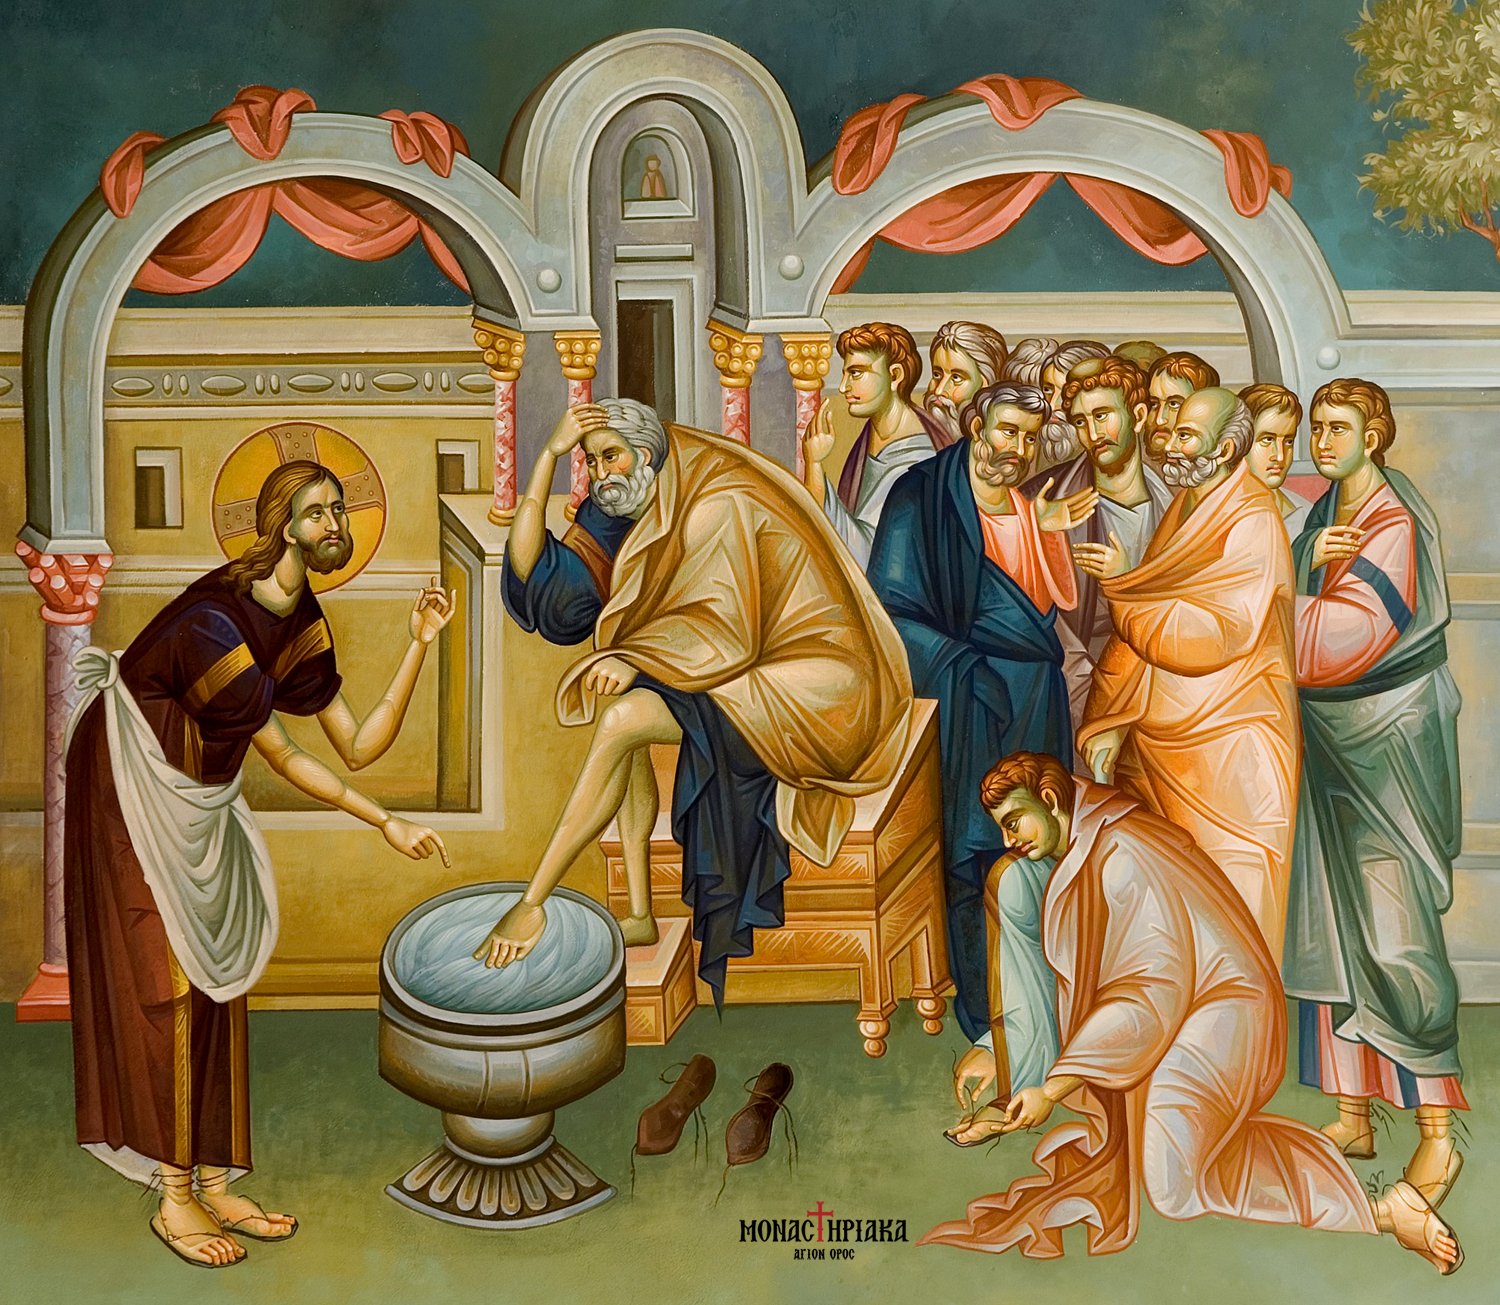 The event of the Washing of the Feet